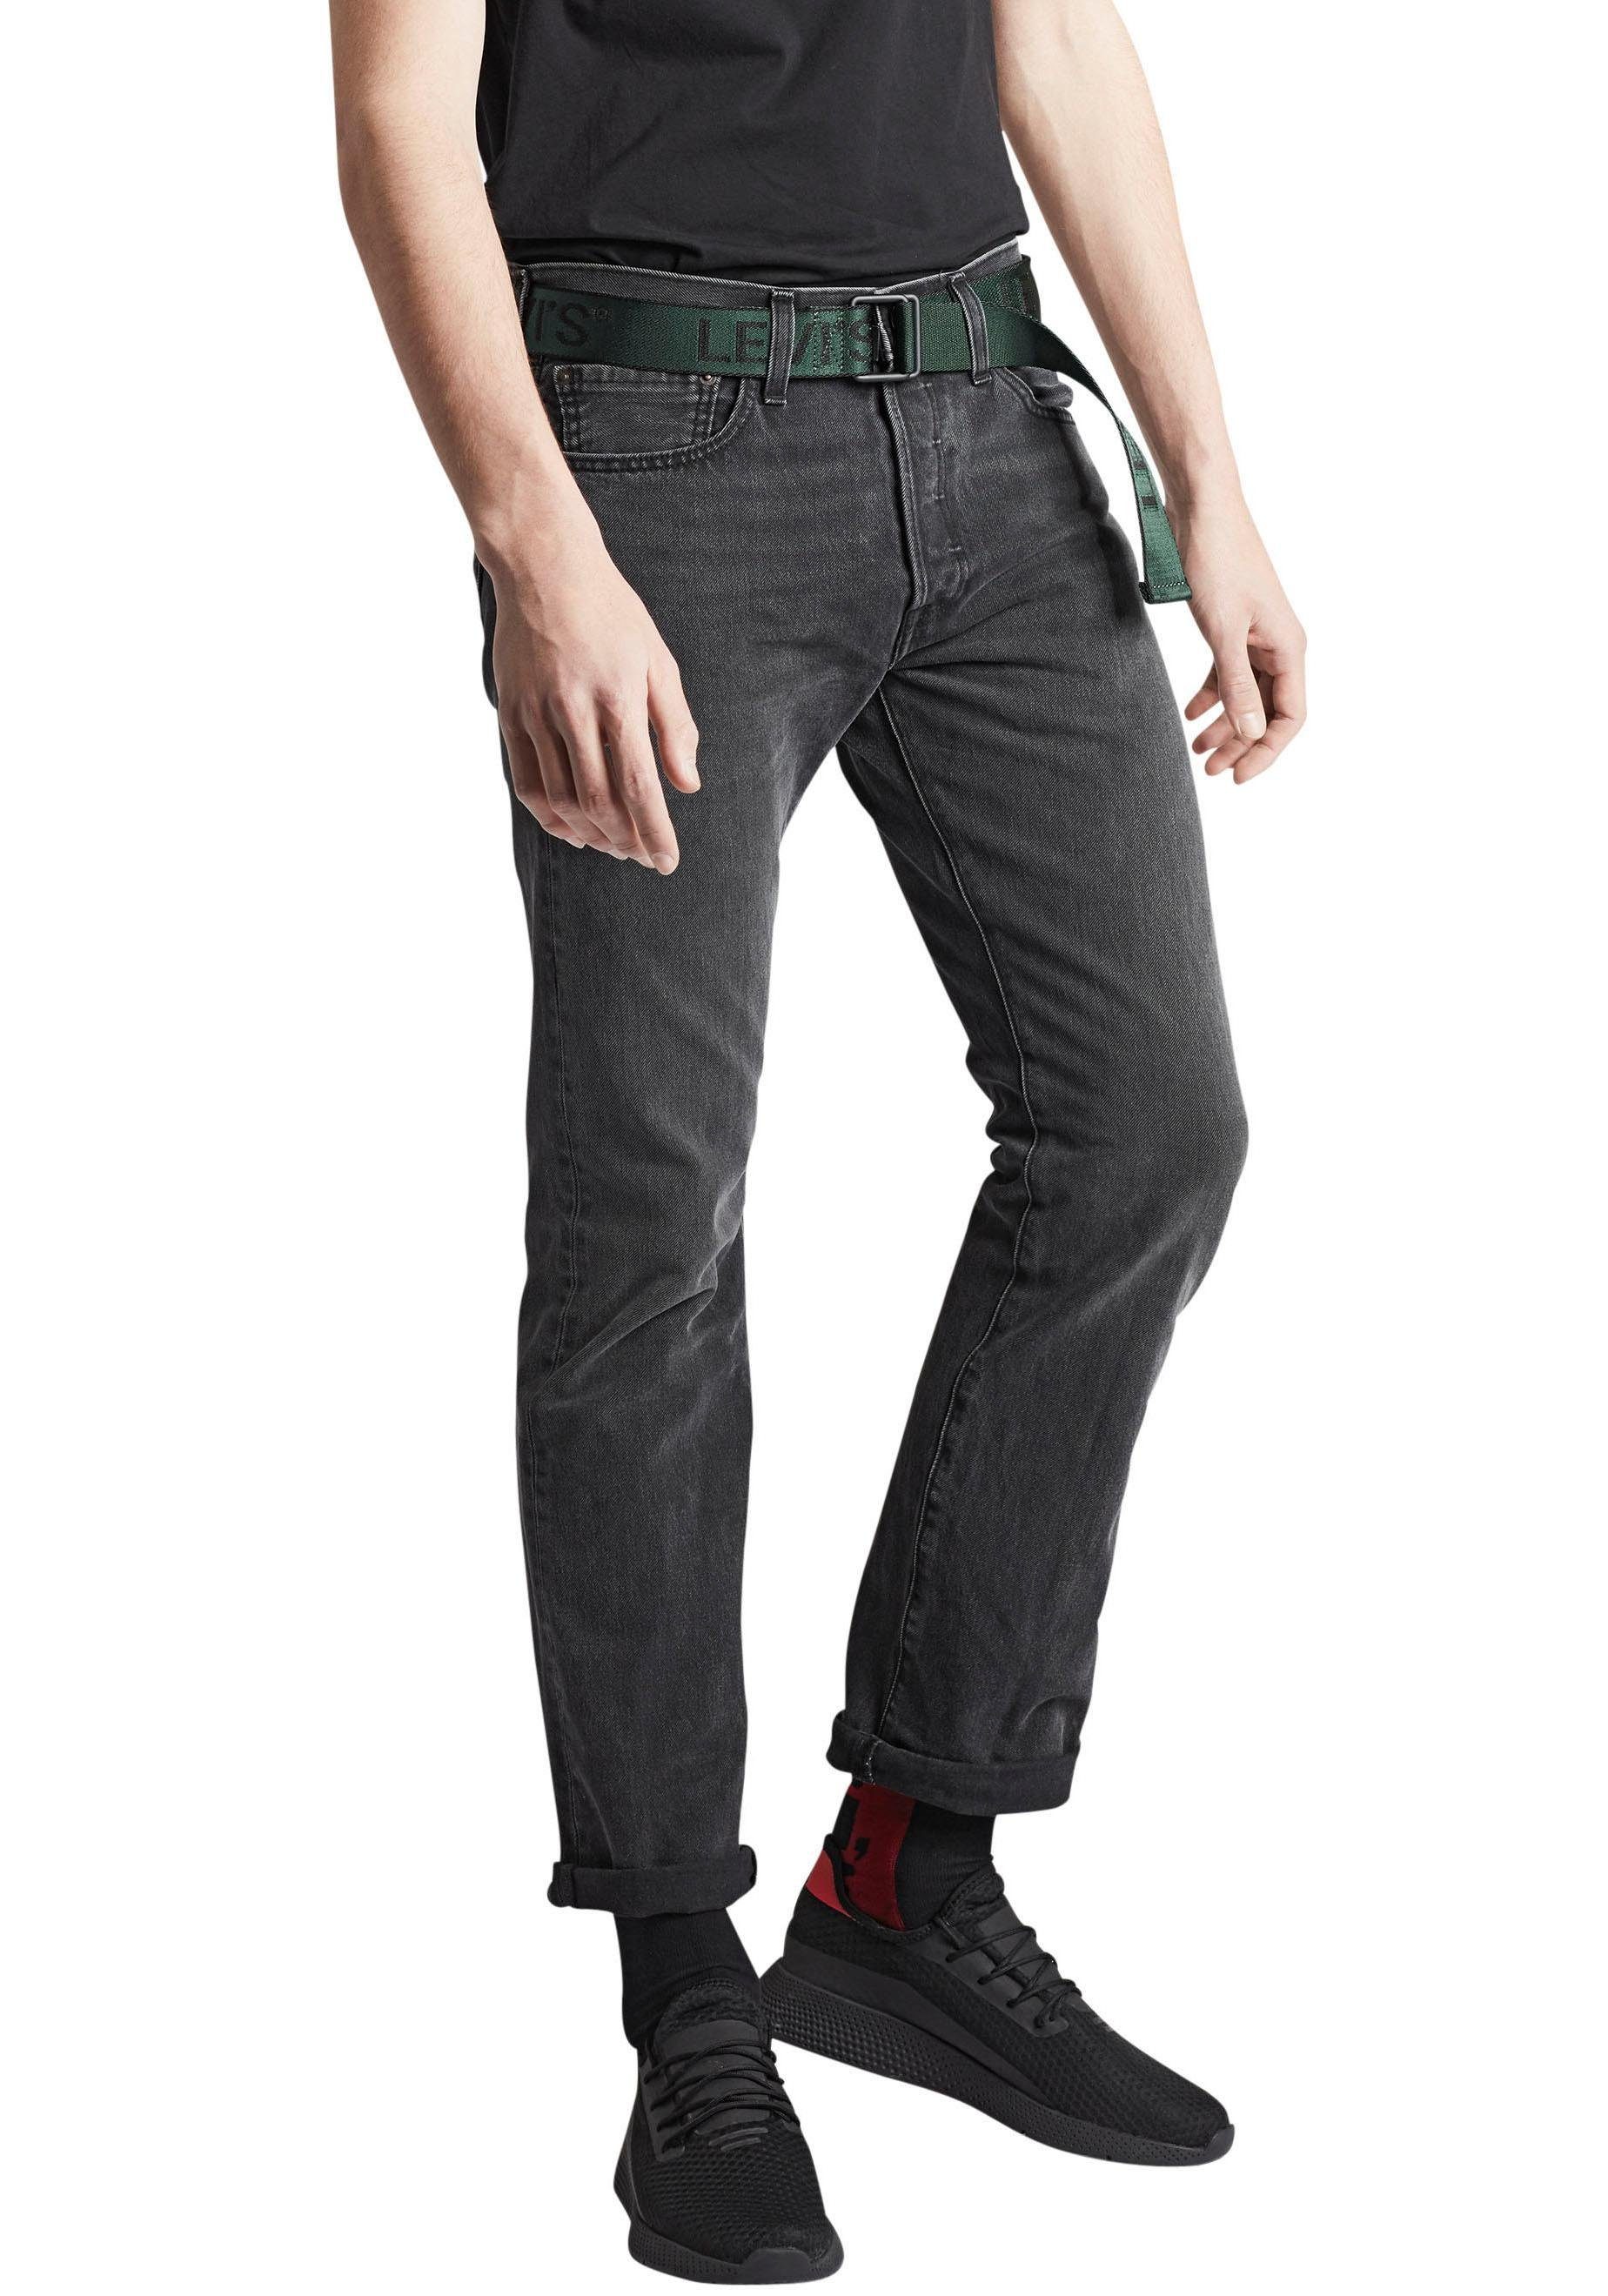 Levi's® Big and Tall 5-Pocket-Jeans »Levis 501 B&T« online kaufen | OTTO